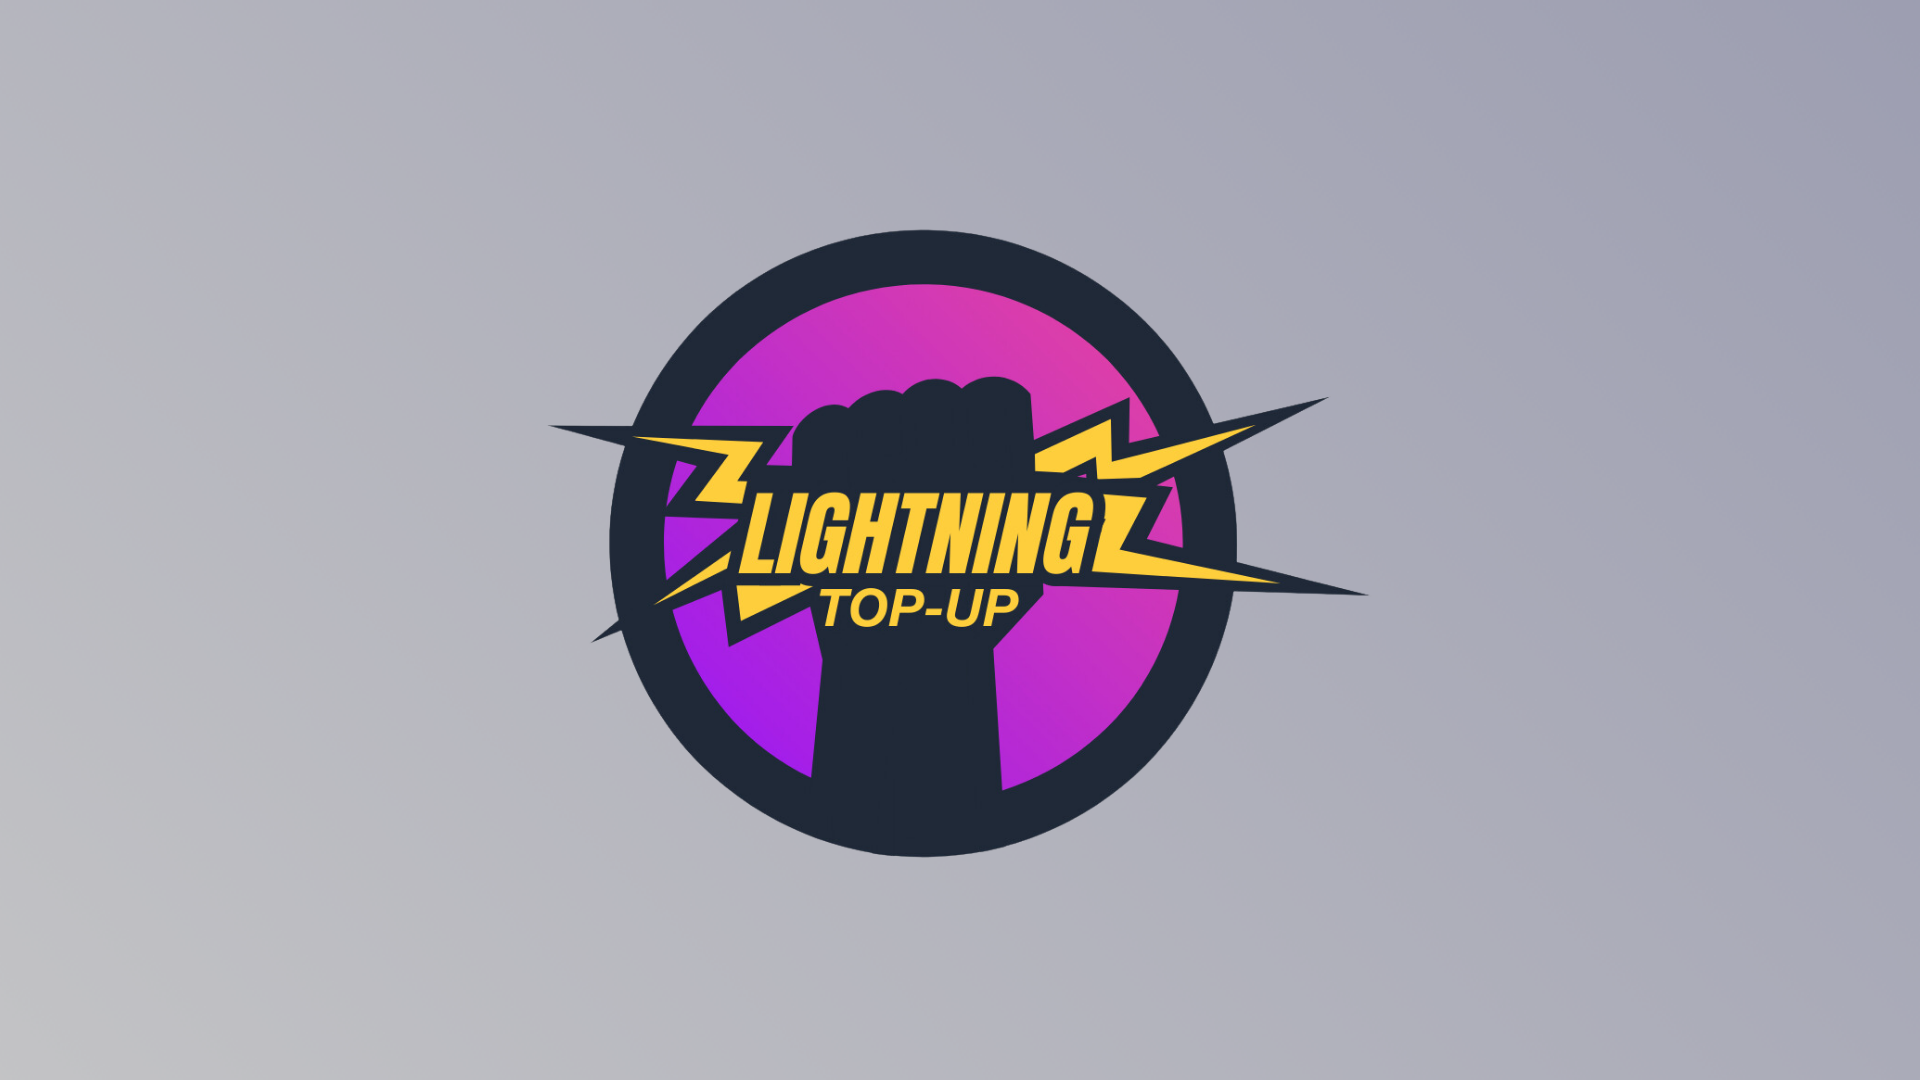 Pocket Bitcoin launches Lightning top-up service